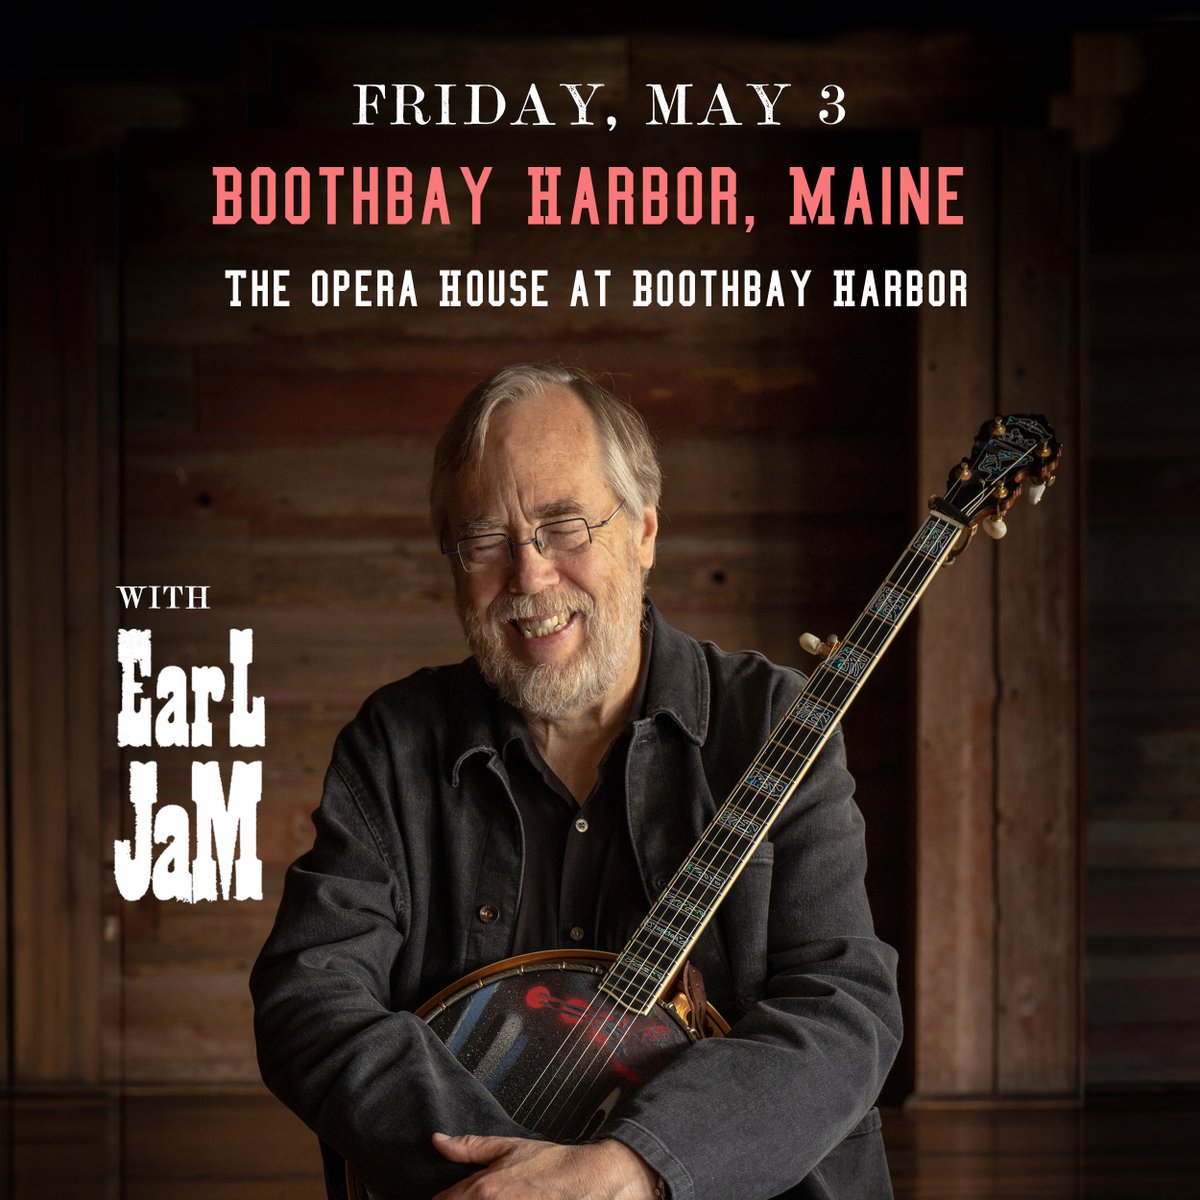 Returning to the great state of #Maine this Friday, May 3rd. Get your tickets for my Earl Jam show in Boothbay Harbor right here: bit.ly/earljamboothbay